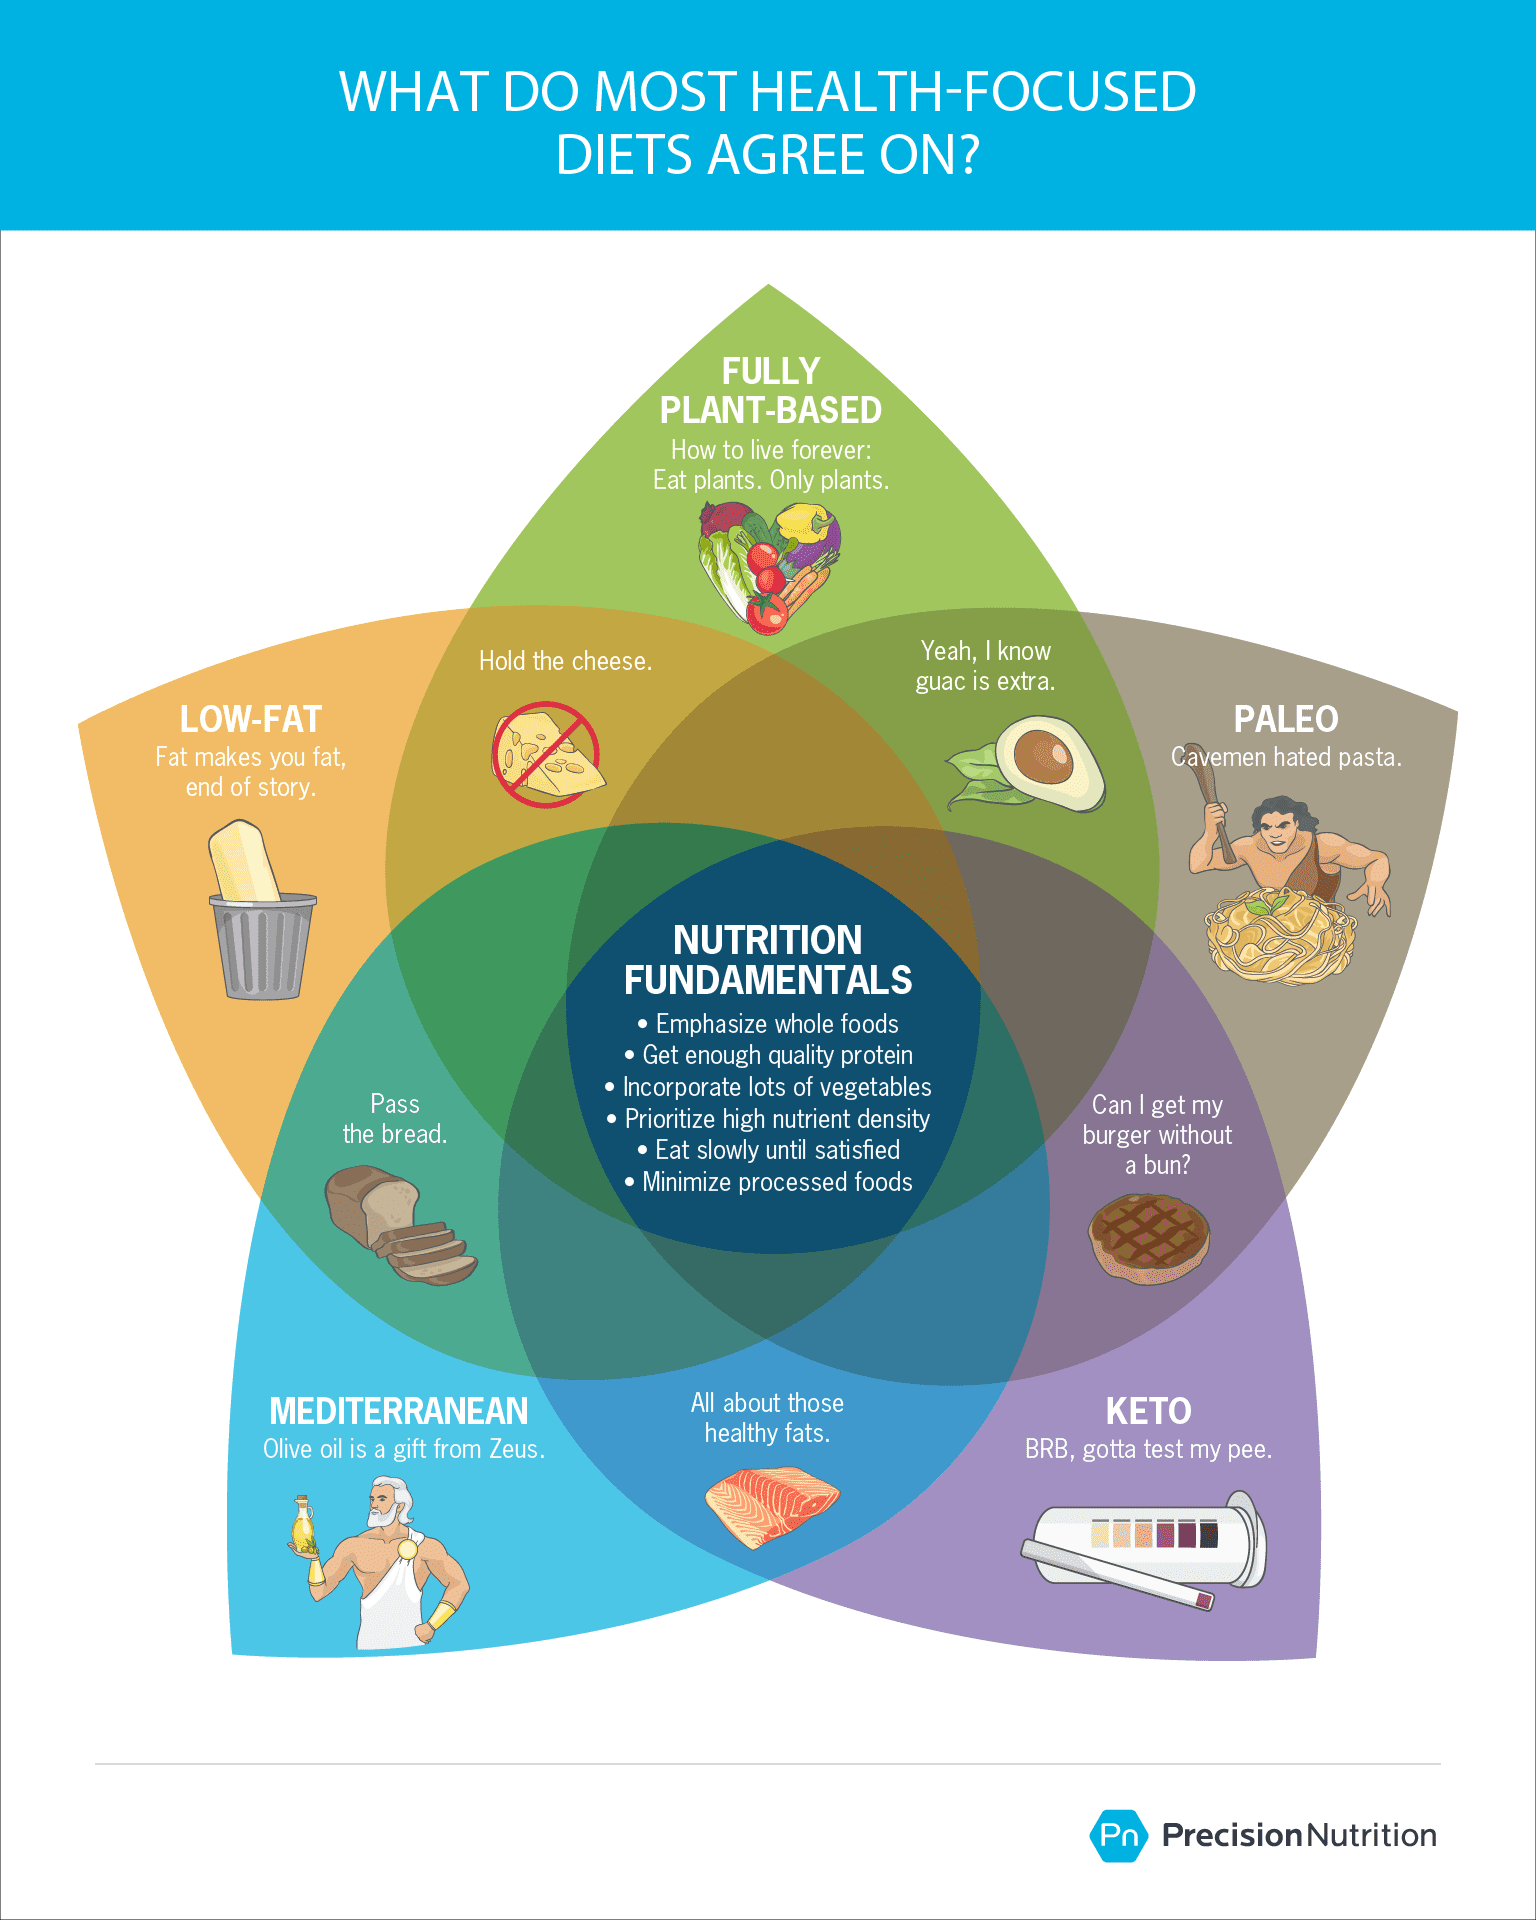 Graphic shows a Venn diagram of five diets: Fully plant-based (vegan), low-fat (high-carb), Paleo, Mediterranean, and keto (low-carb). In the middle (what they all have in common) are these nutrition fundamentals: 1) emphasize whole foods, 2) get enough quality protein, 3) incorporate lots of vegetables, 4) prioritize high nutrient density, 5) eat slowly until satisfied, 6) minimize processed foods.